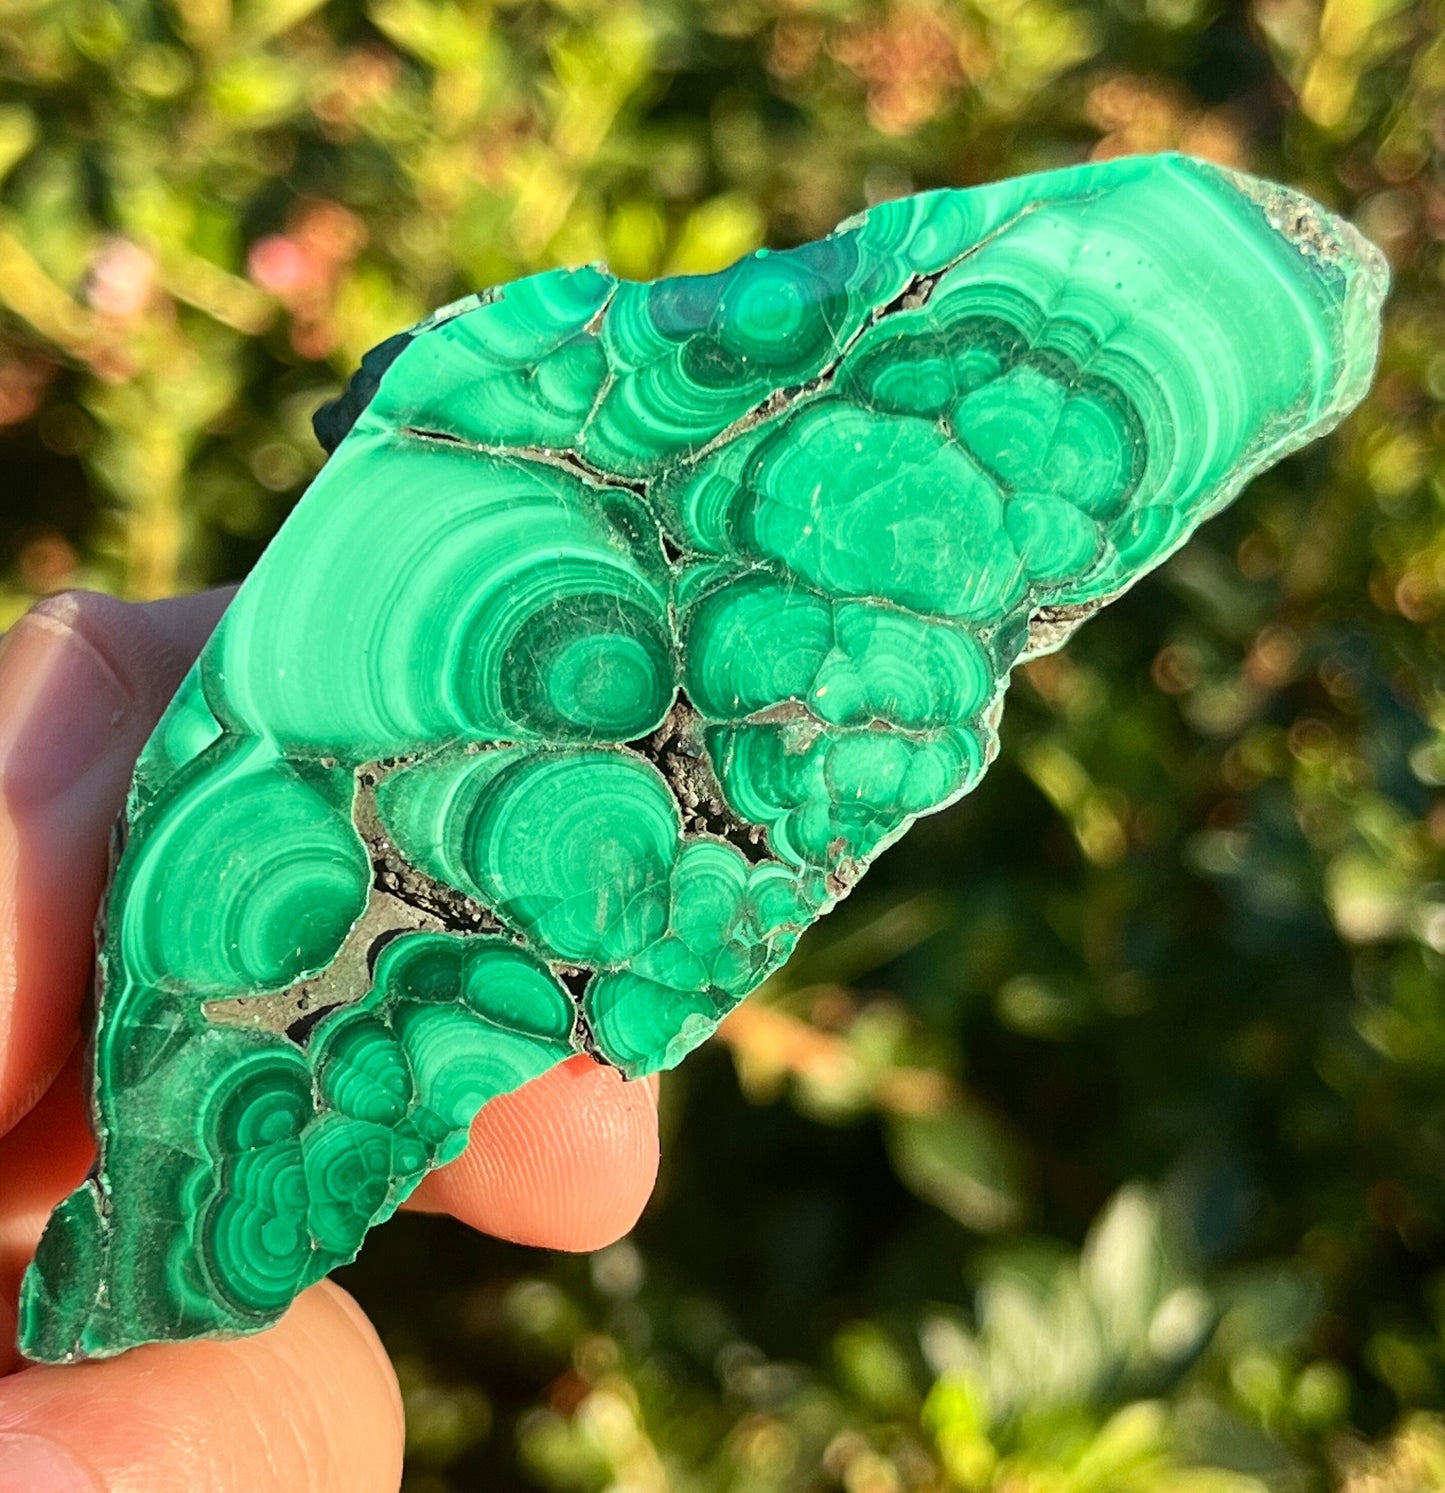 Chunky Malachite Slab Natural Raw Polished Minerals Crystals ~ Crystal Stone Carved Decor Display Crystal